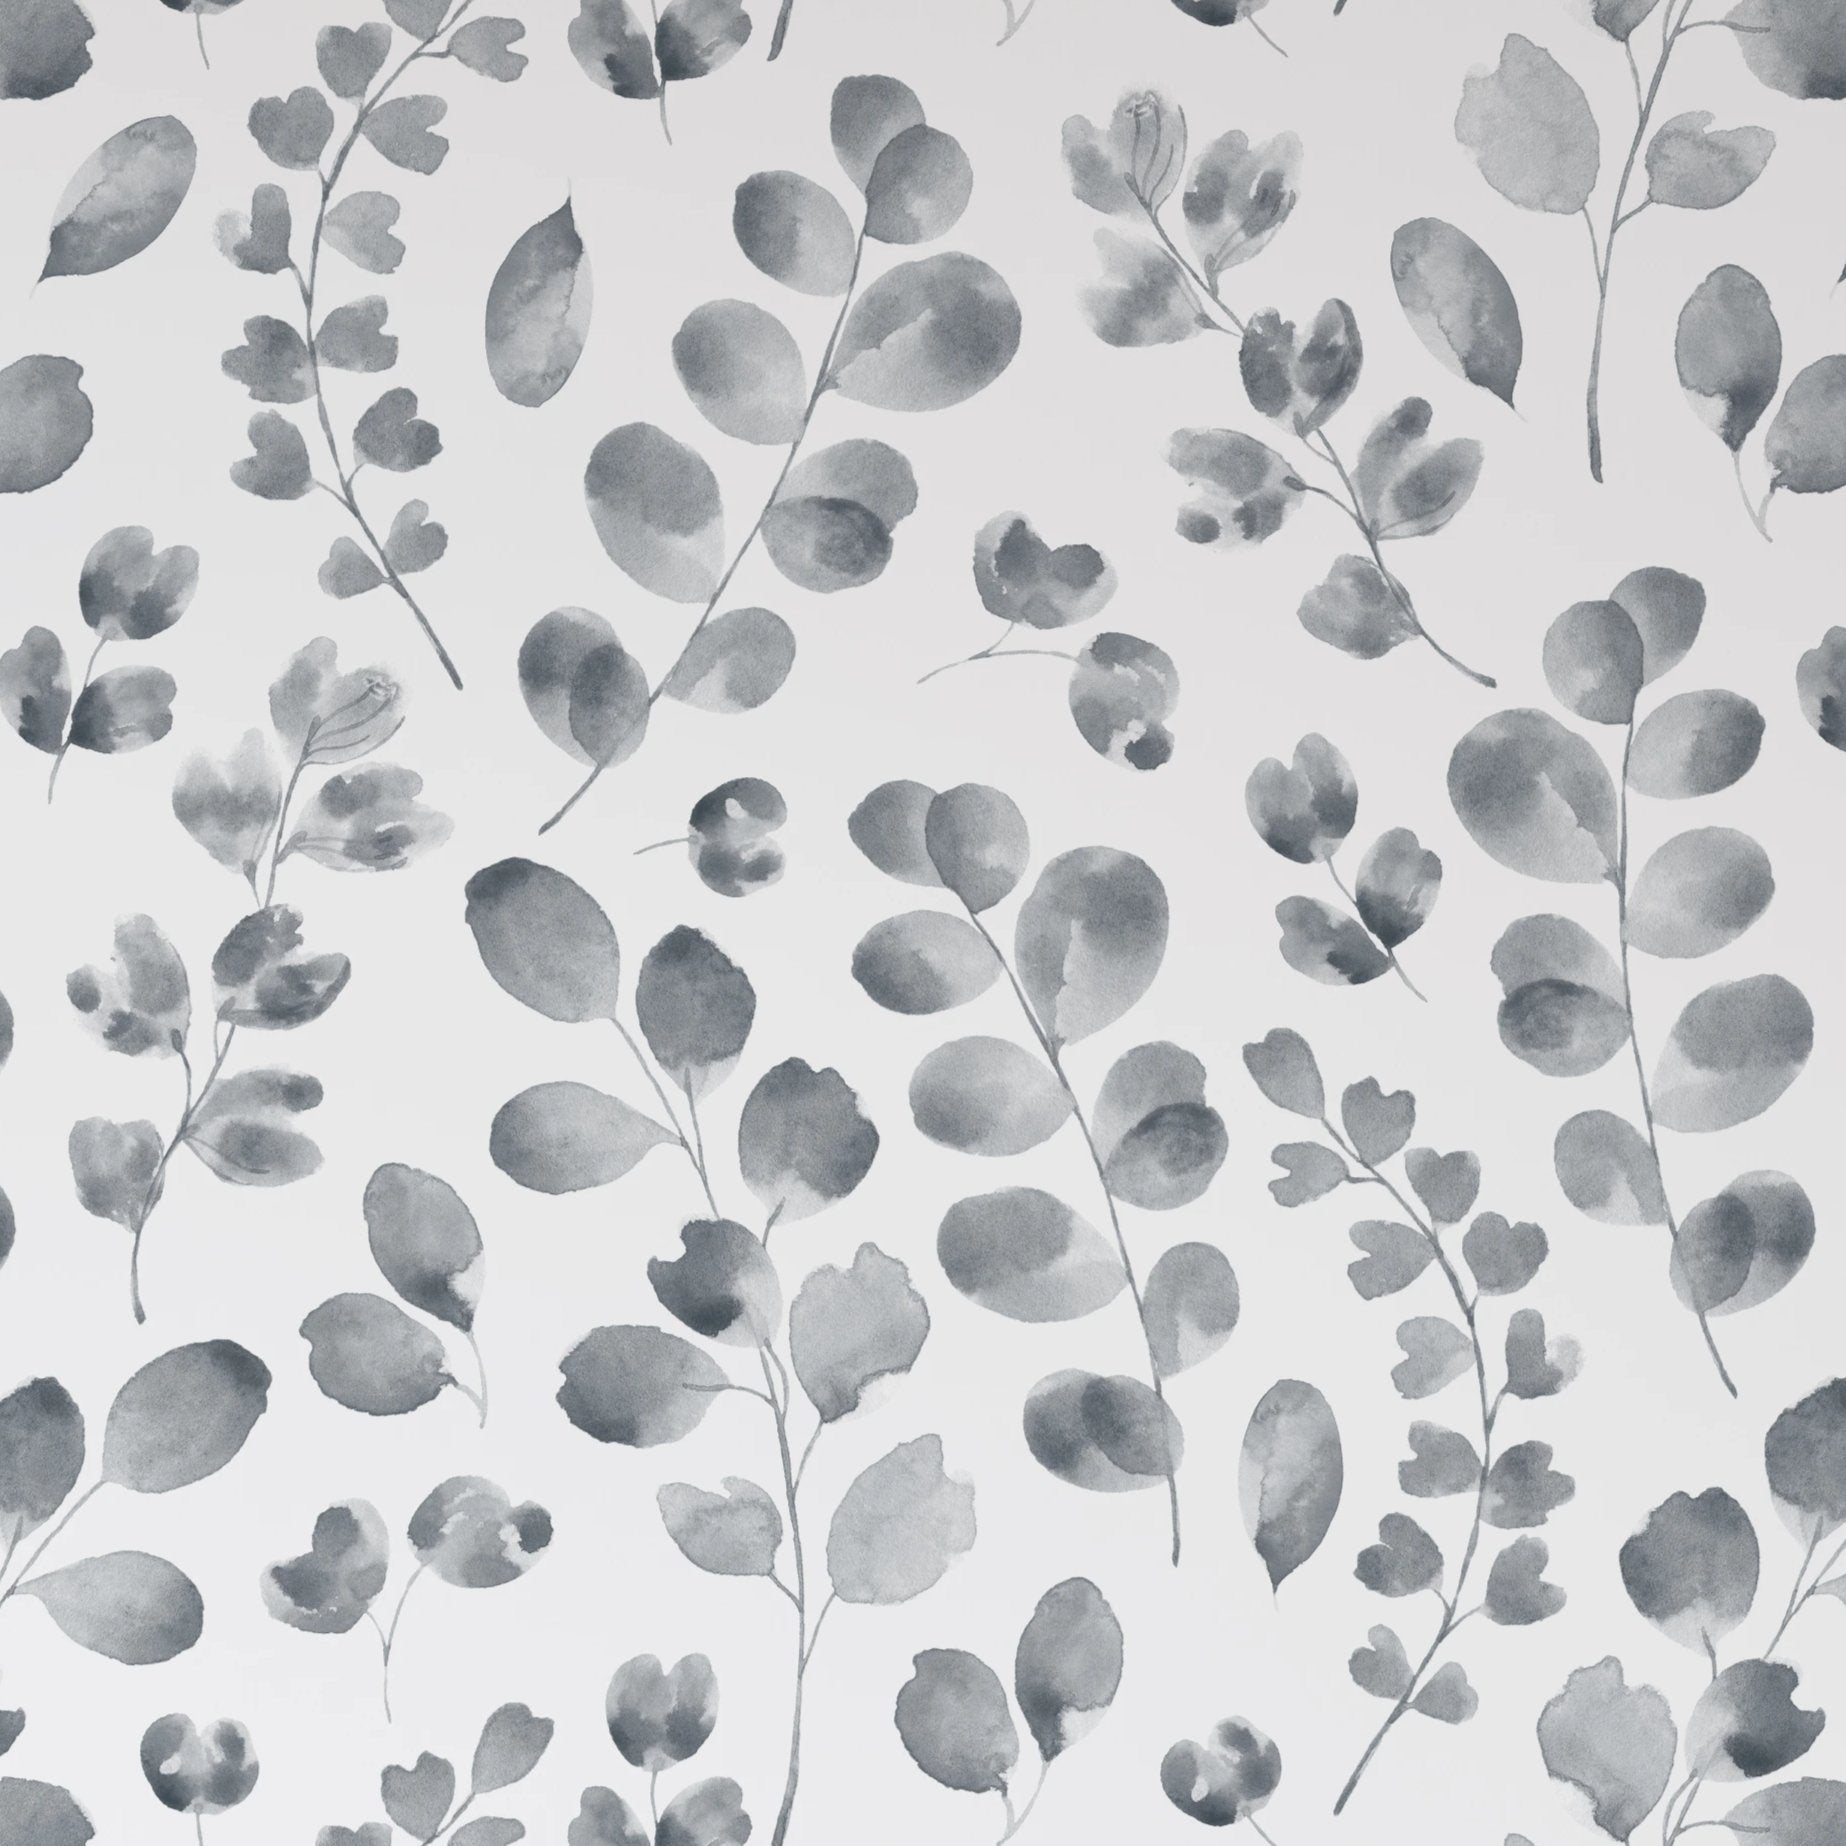 A close-up of the Dark Floral Watercolor Wallpaper showing detailed grey watercolor leaves on a pure white backdrop, offering a tranquil and artistic touch suitable for a variety of interior spaces